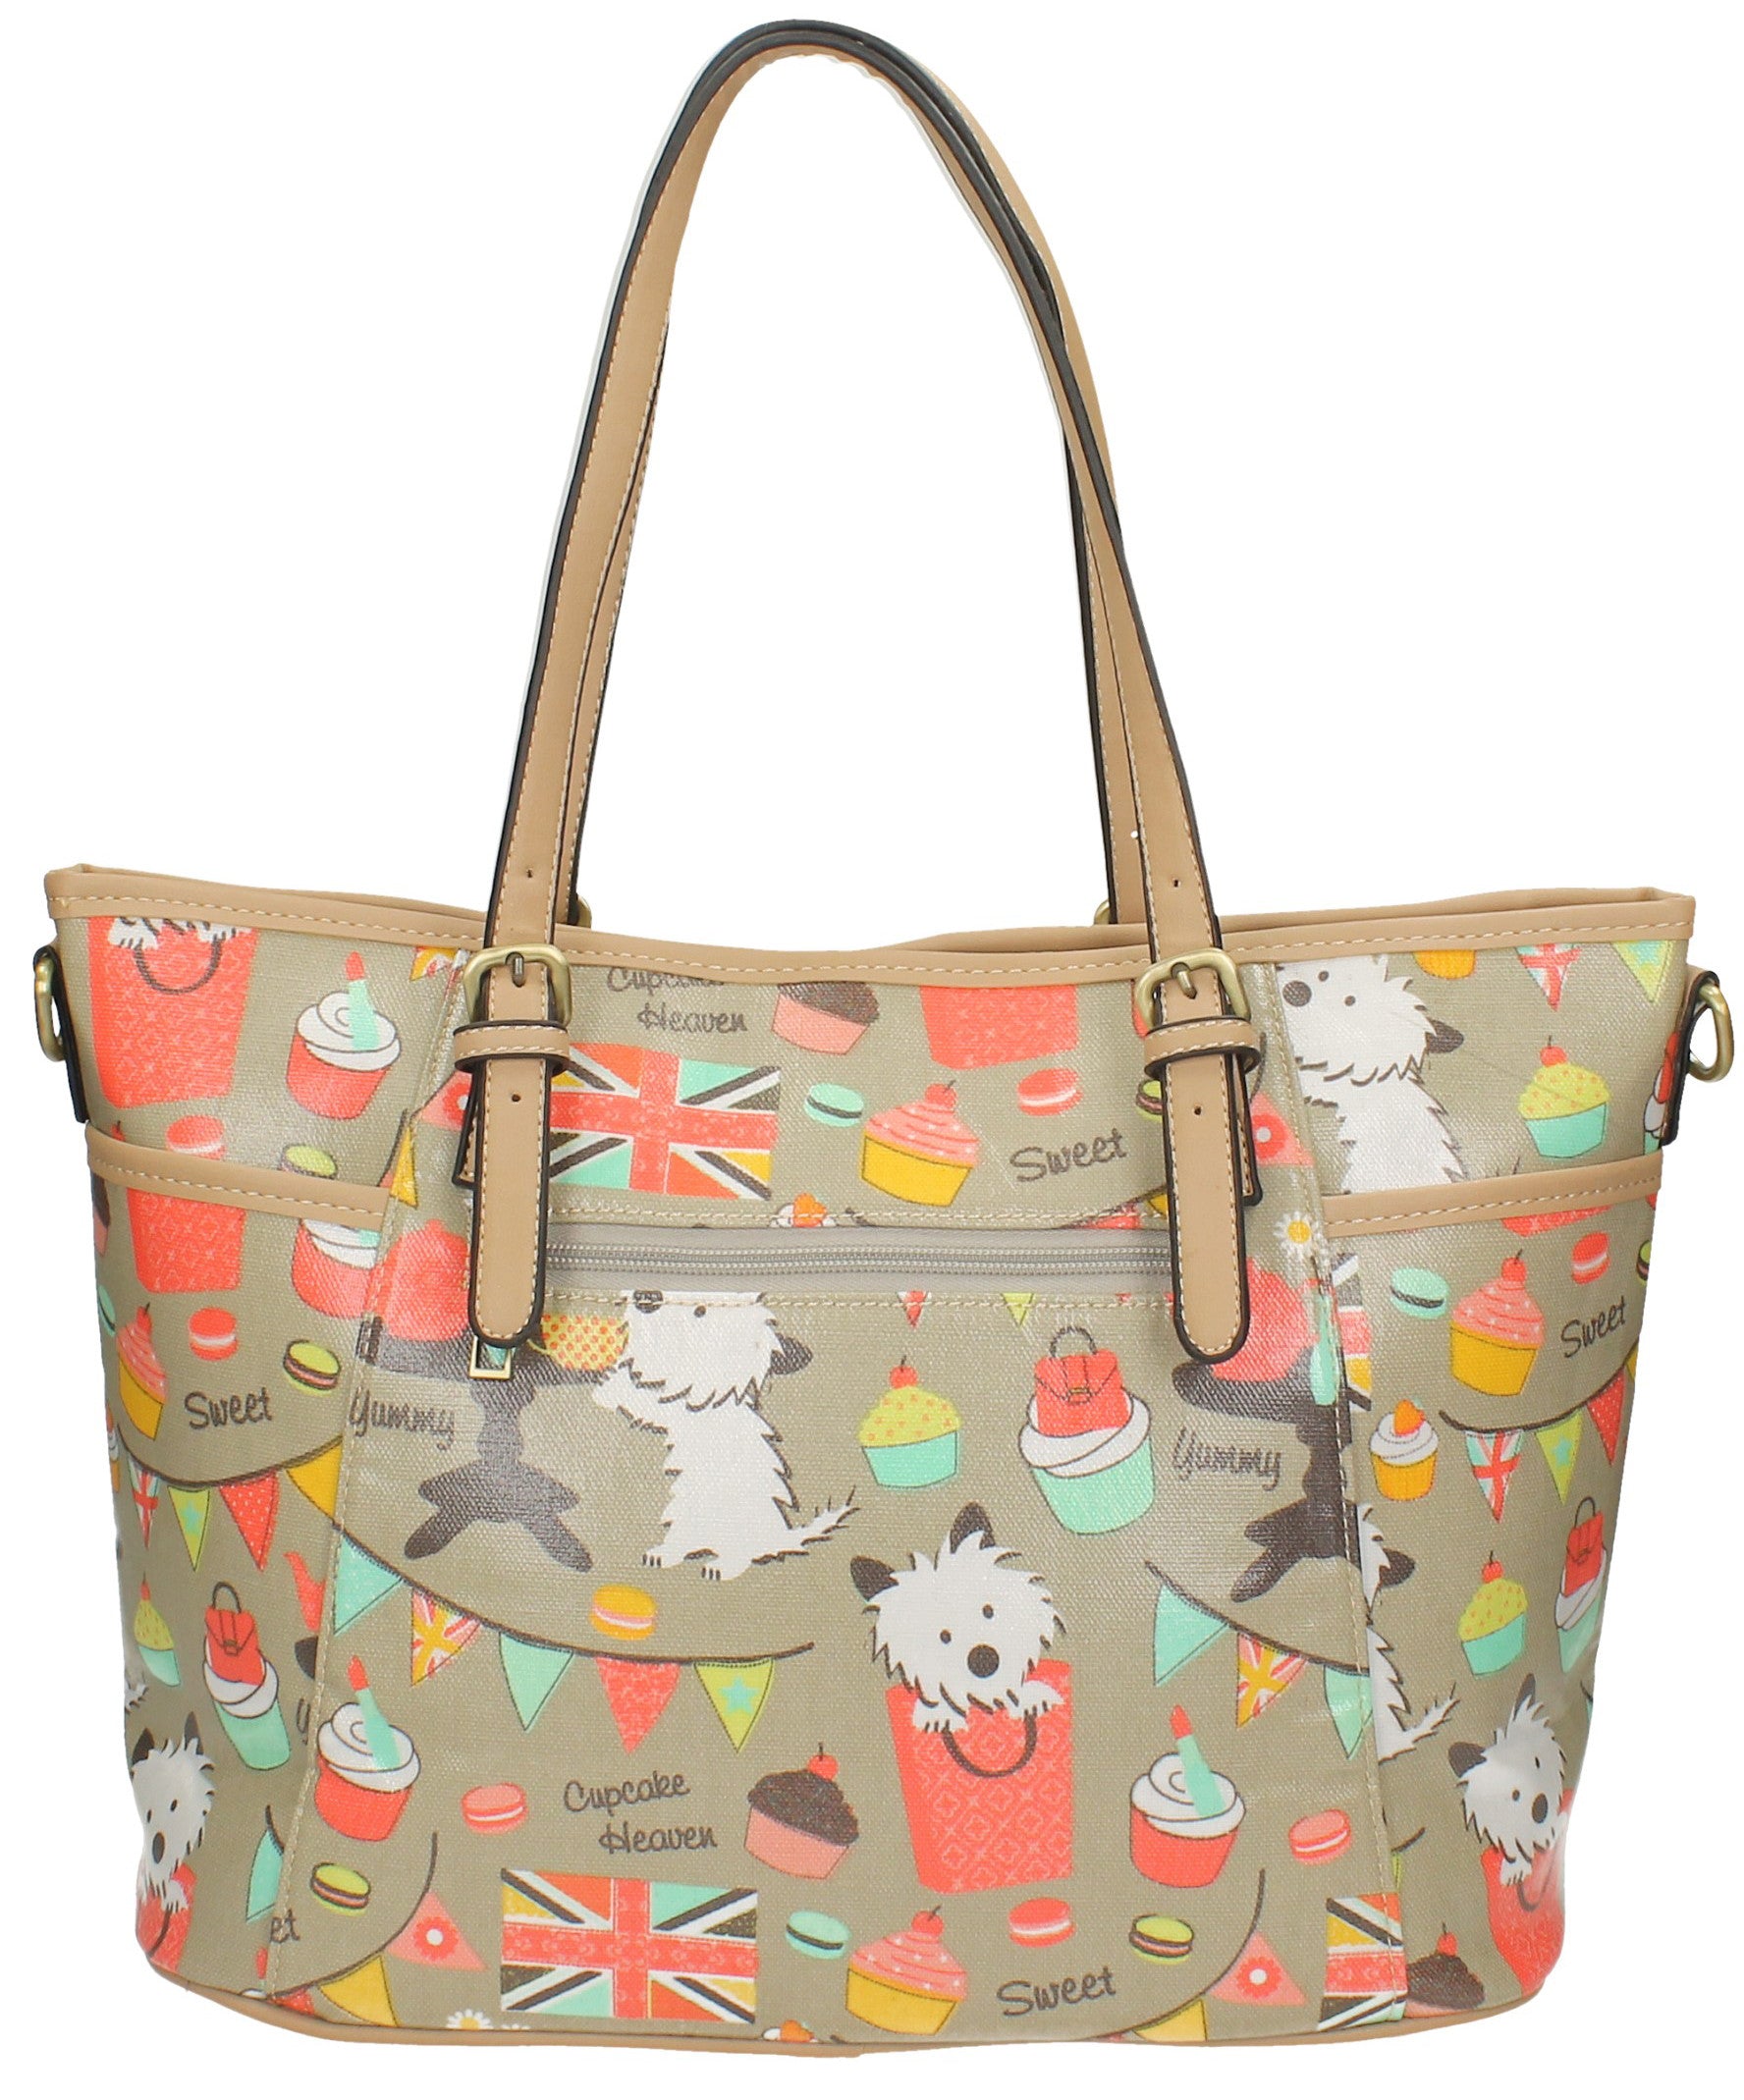 Swanky Swans Biba Dog Cupcake Tote Perfect for Back To School!